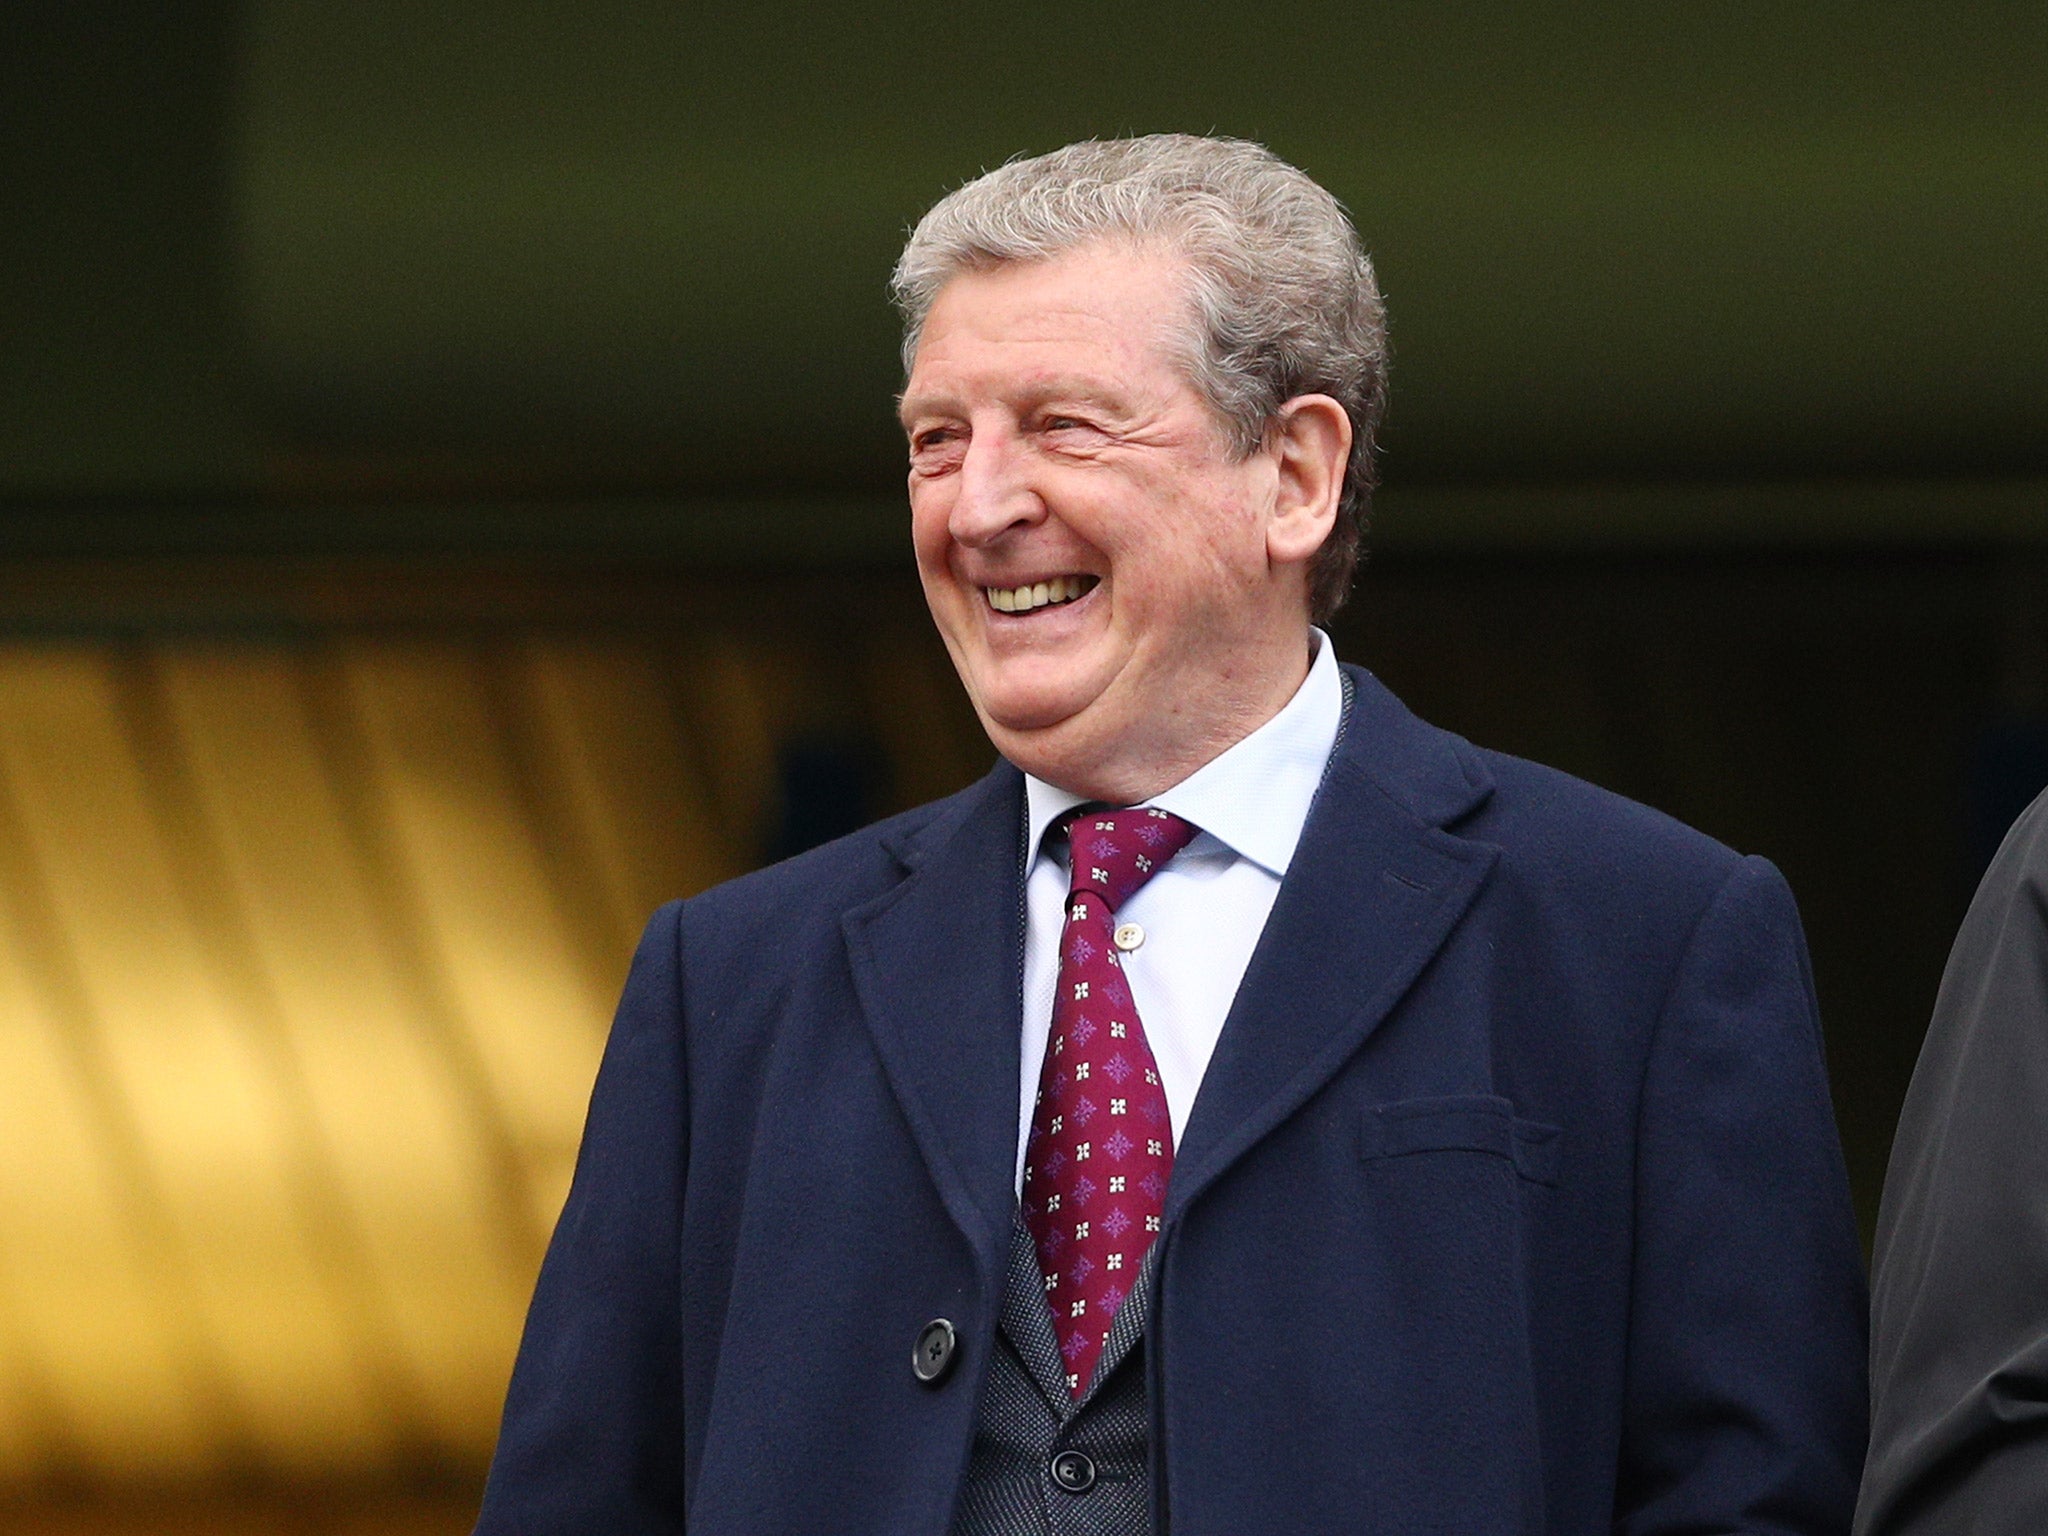 Roy Hodgson says England are not yet experienced enough to win Euro 2016